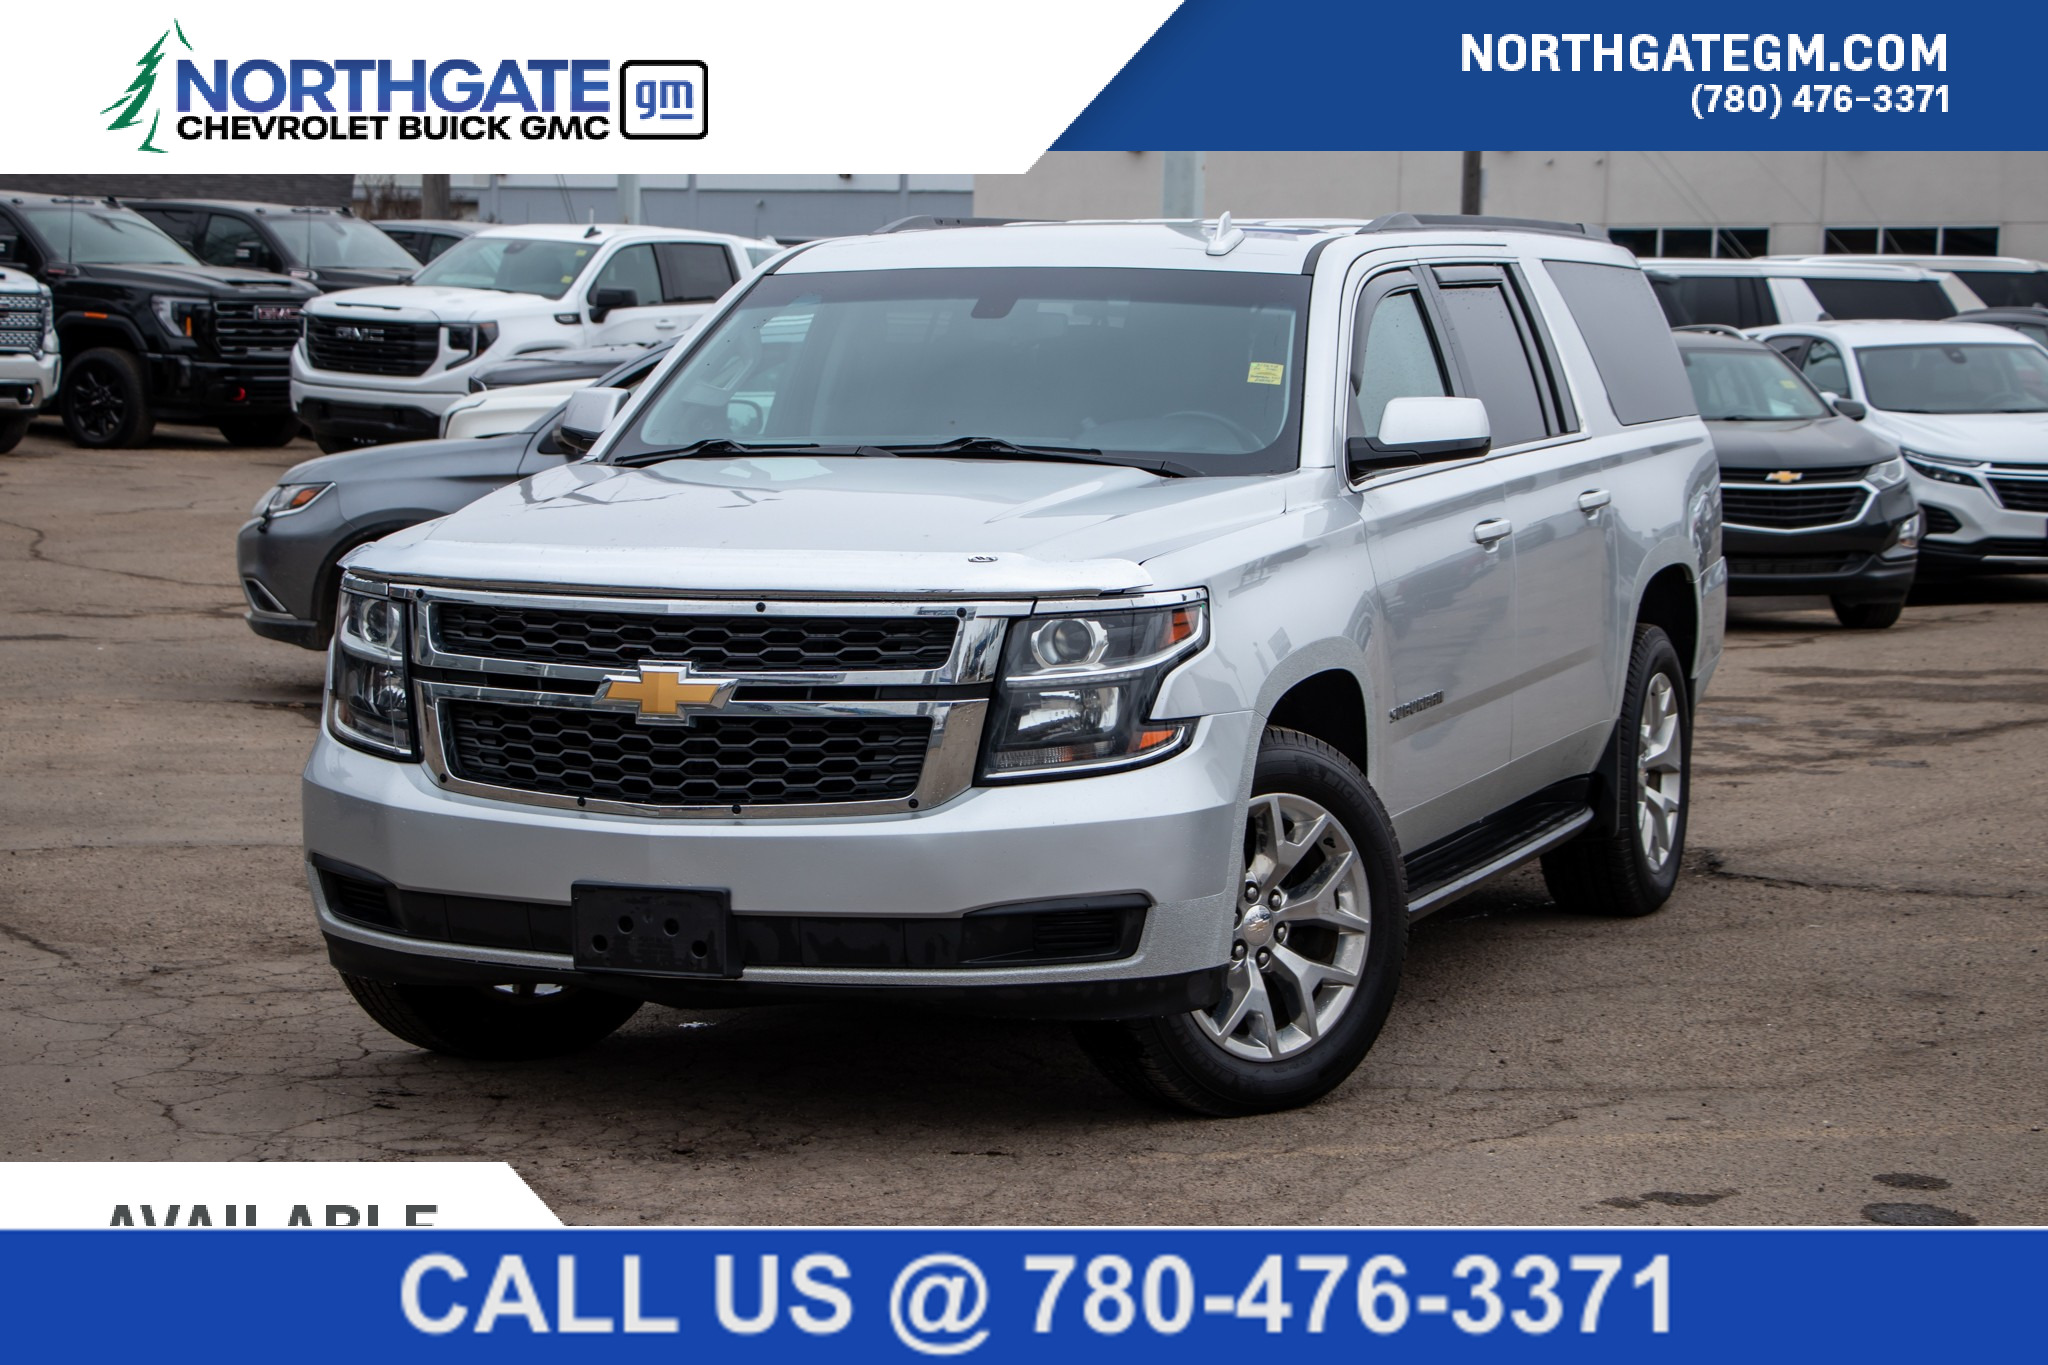 2020 Chevrolet Suburban LS LS | 4X4 | TRAILERING PACKAGE | REAR VISION CAM